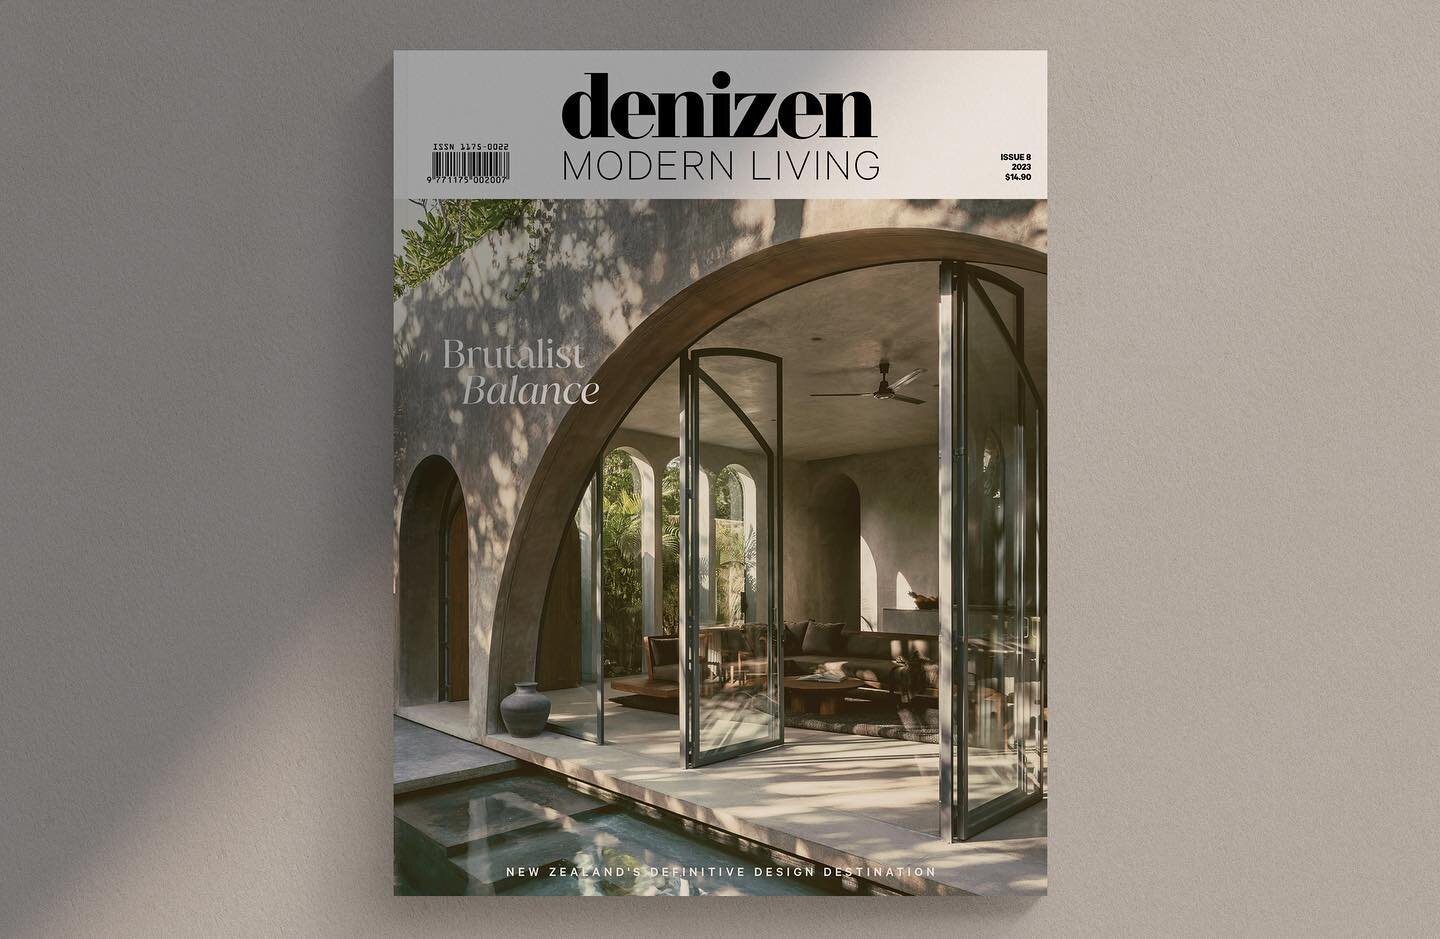 A heartfelt thank you to @denizenmagazine for featuring @villapetricor in their Modern Living new issue&rsquo;s cover. 
Being featured alongside the world's architectural elites is an honor we do not take lightly. It's moments like these that remind 